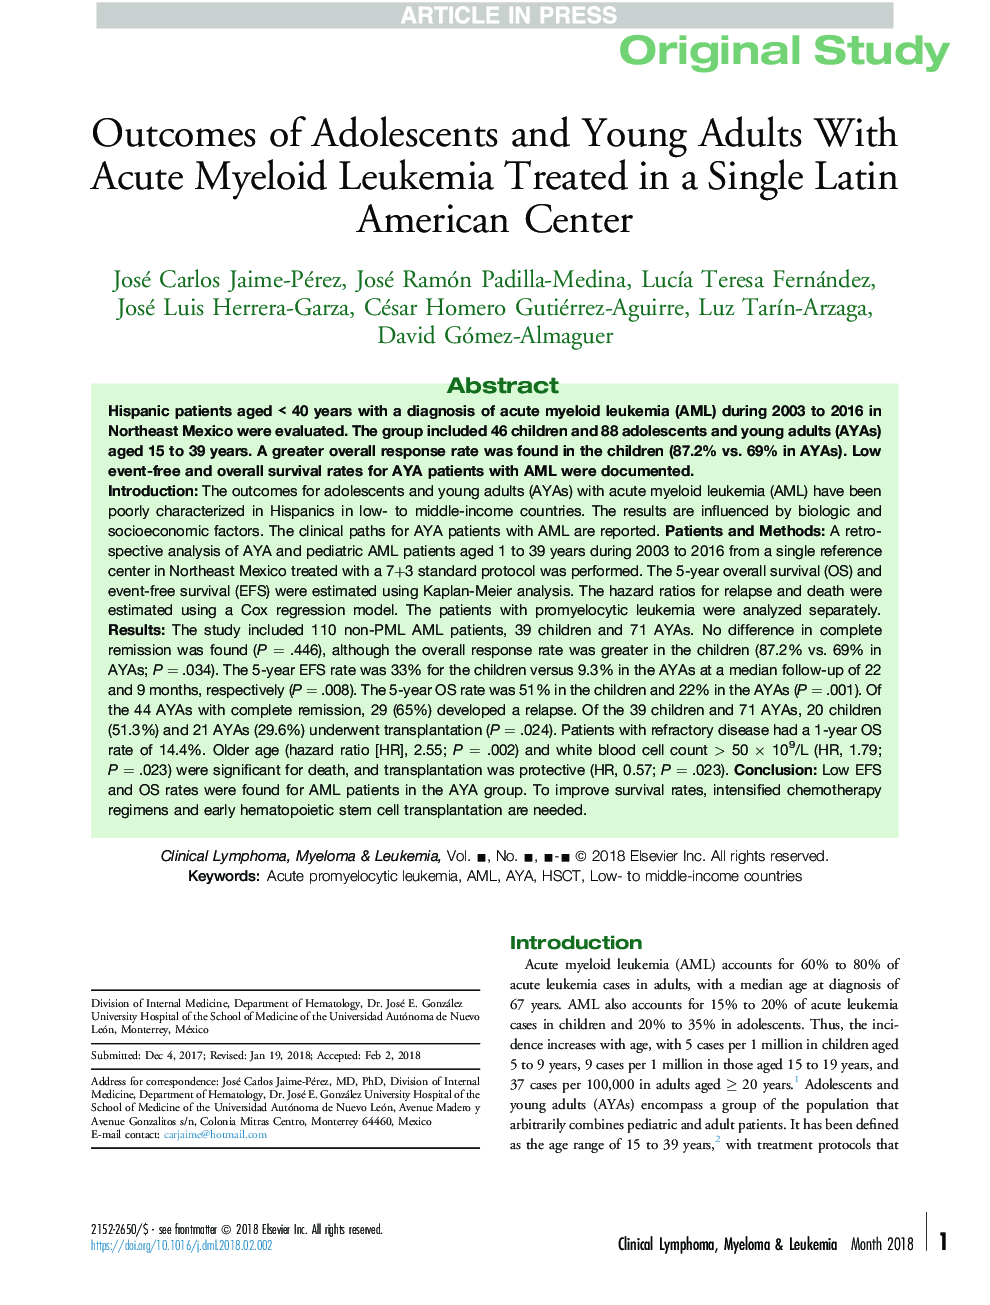 Outcomes of Adolescents and Young Adults With Acute Myeloid Leukemia Treated in a Single Latin American Center